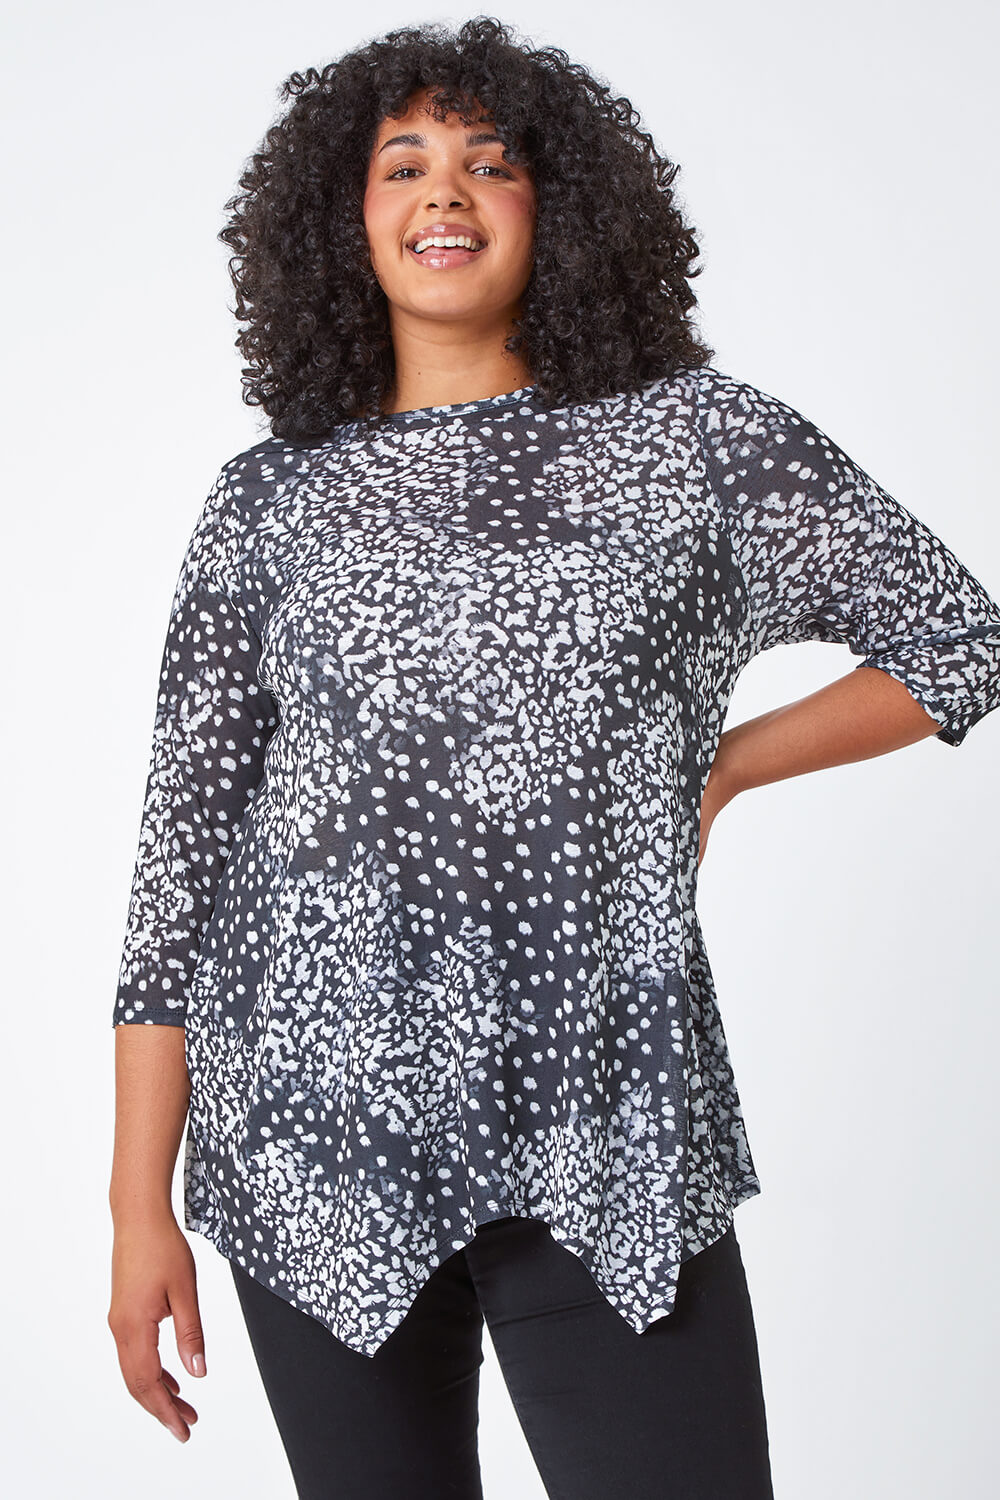 Charcoal Curve Animal Print Tunic Stretch Top , Image 4 of 5